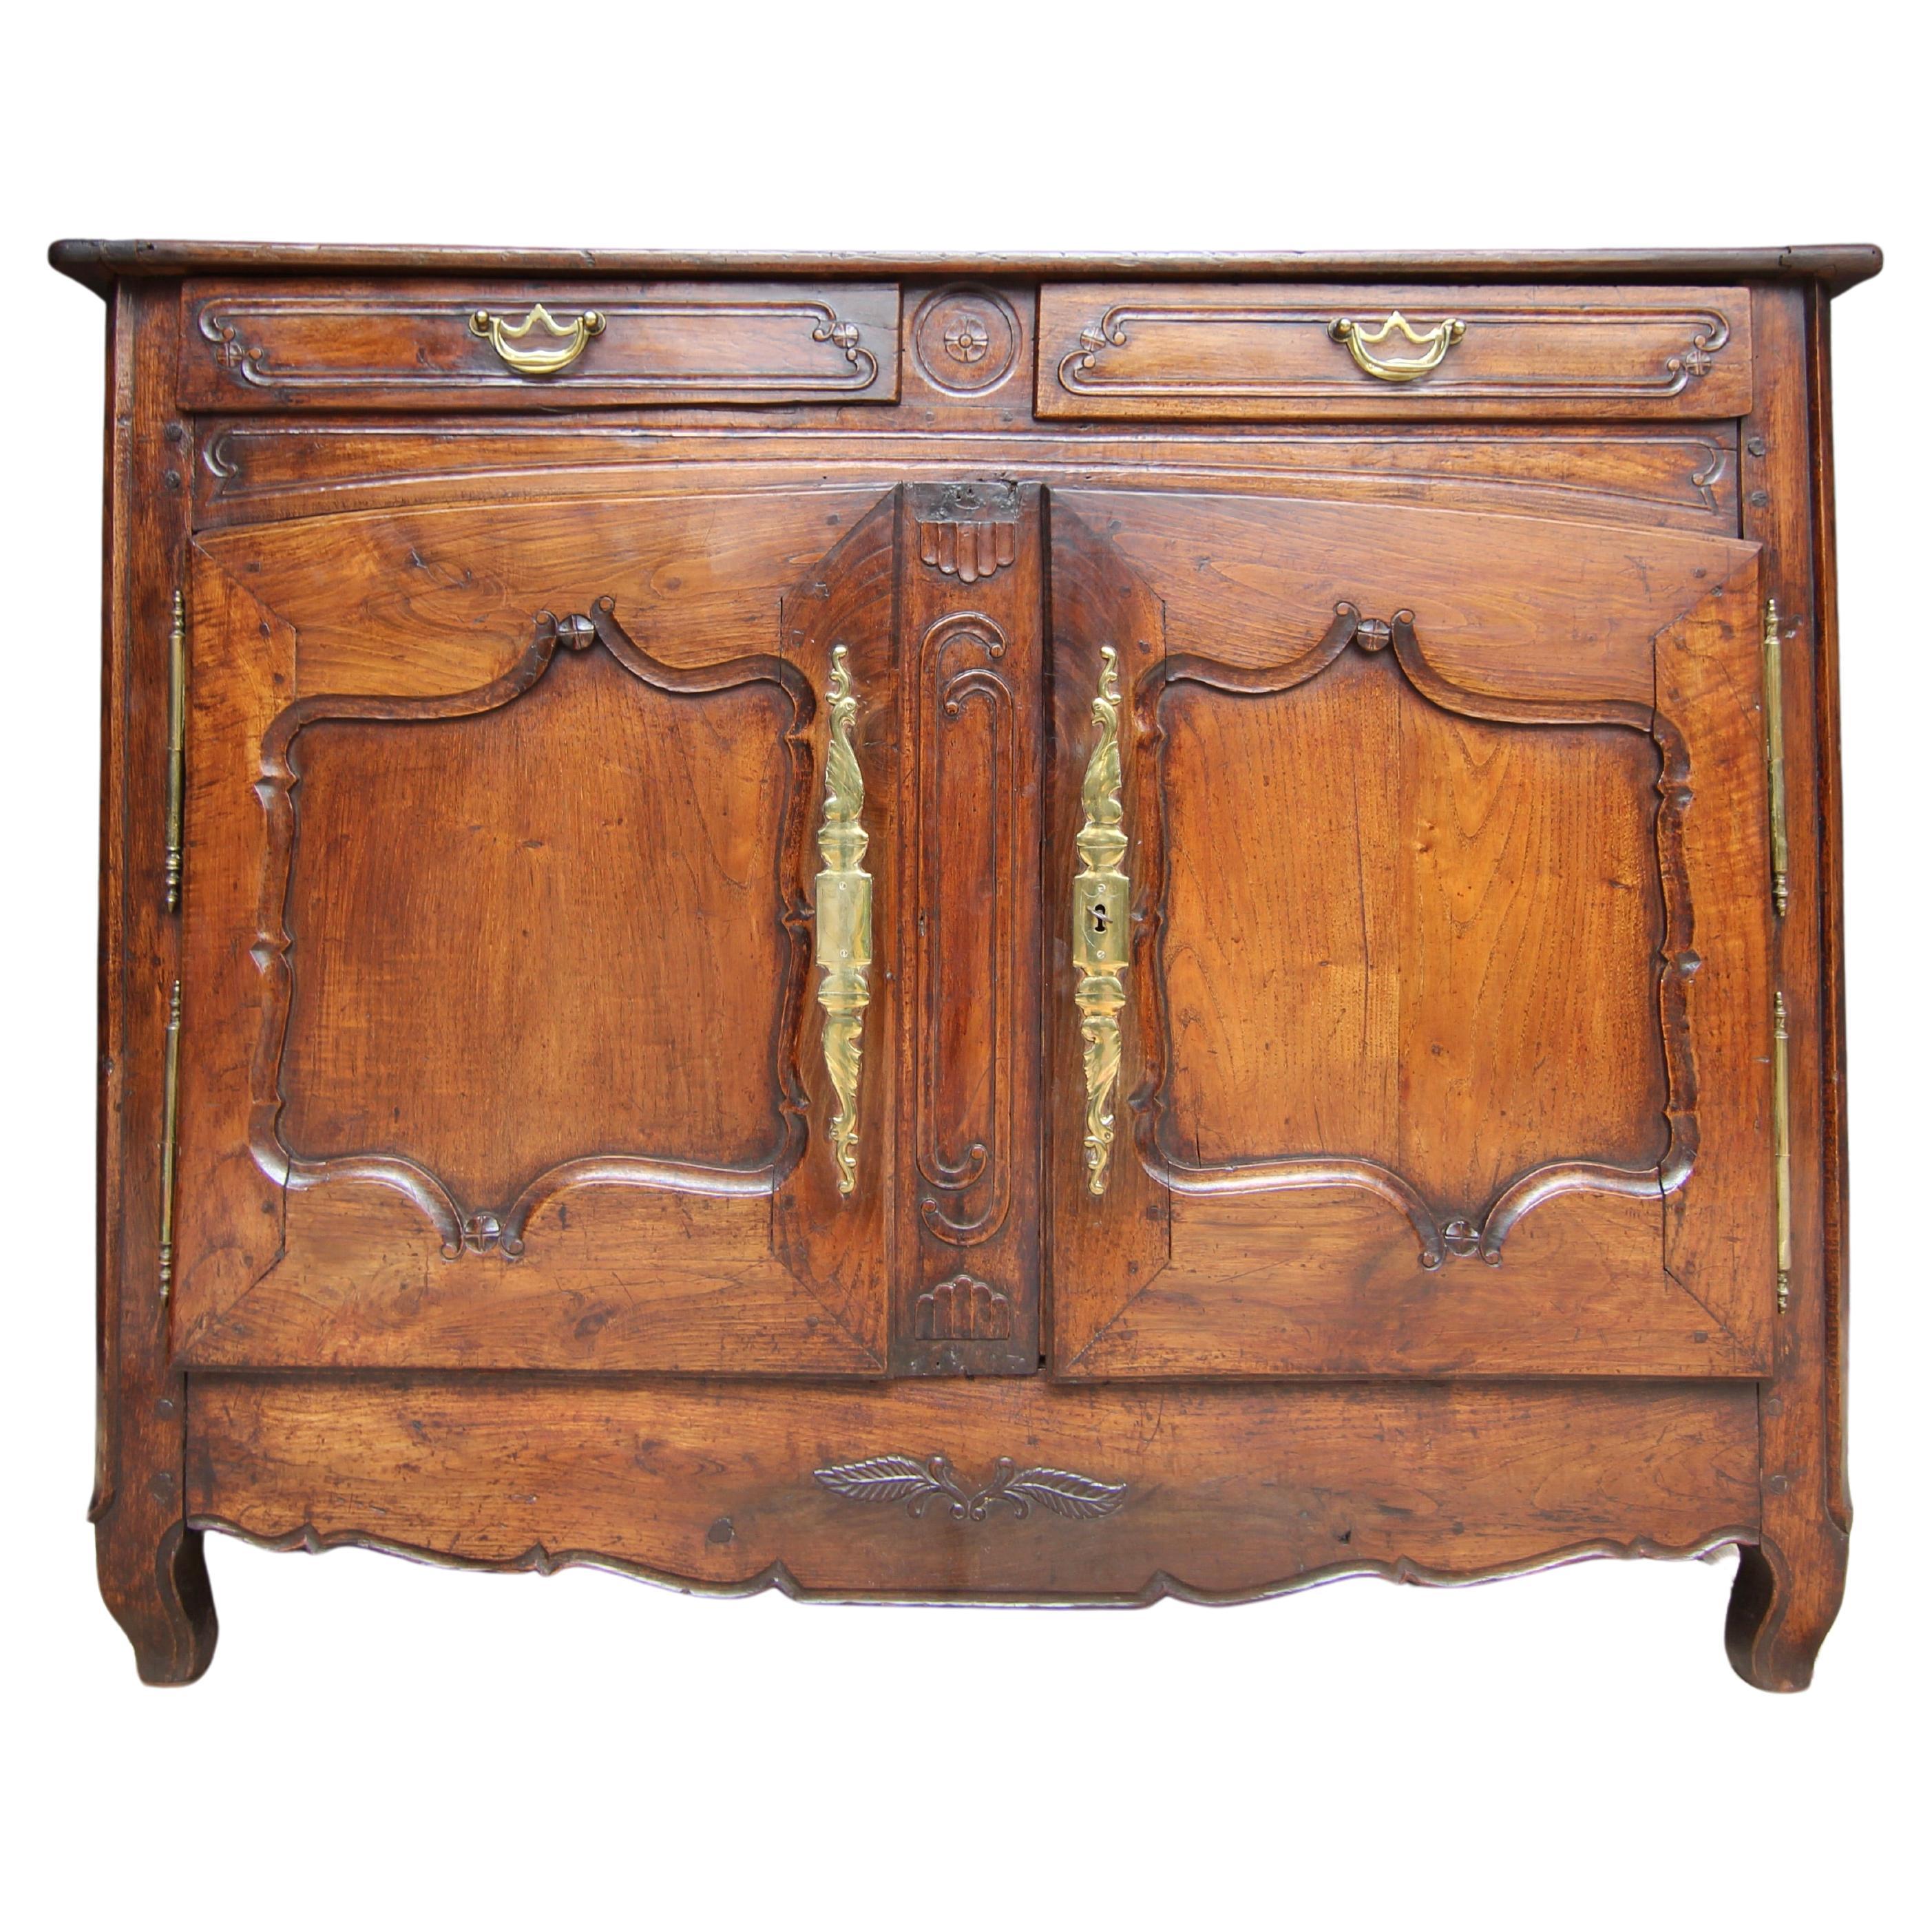 Late 18th Century French Provincial Buffet